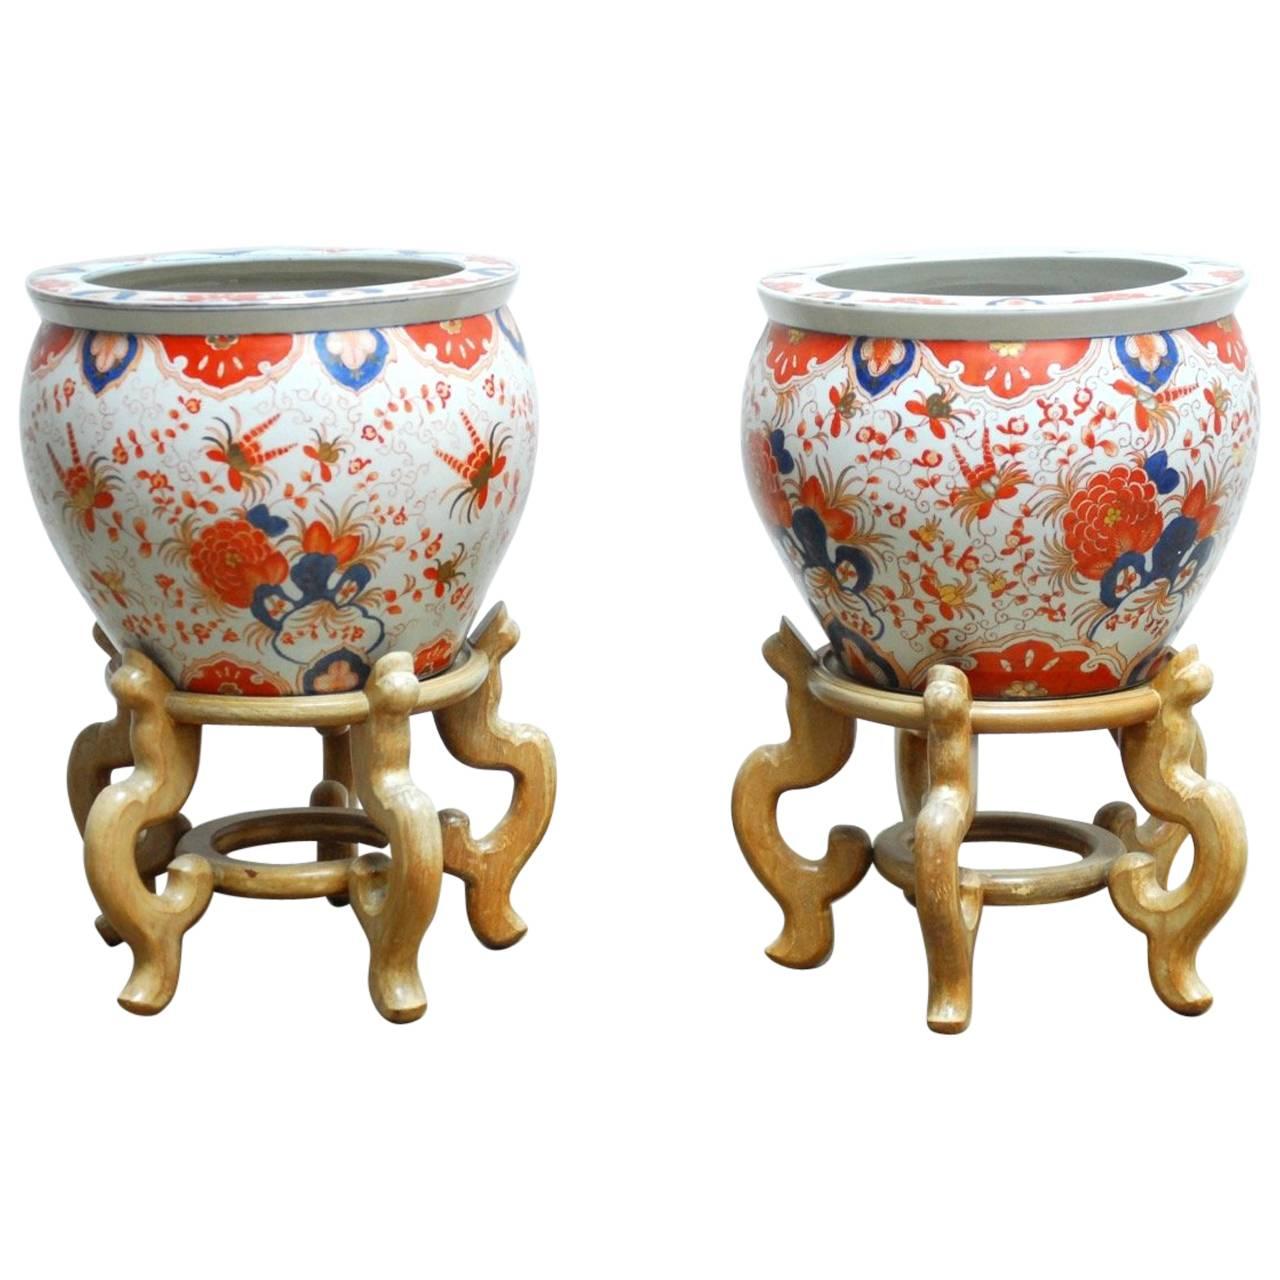 Pair of Chinese Porcelain Fish Bowls on Stands for Gumps